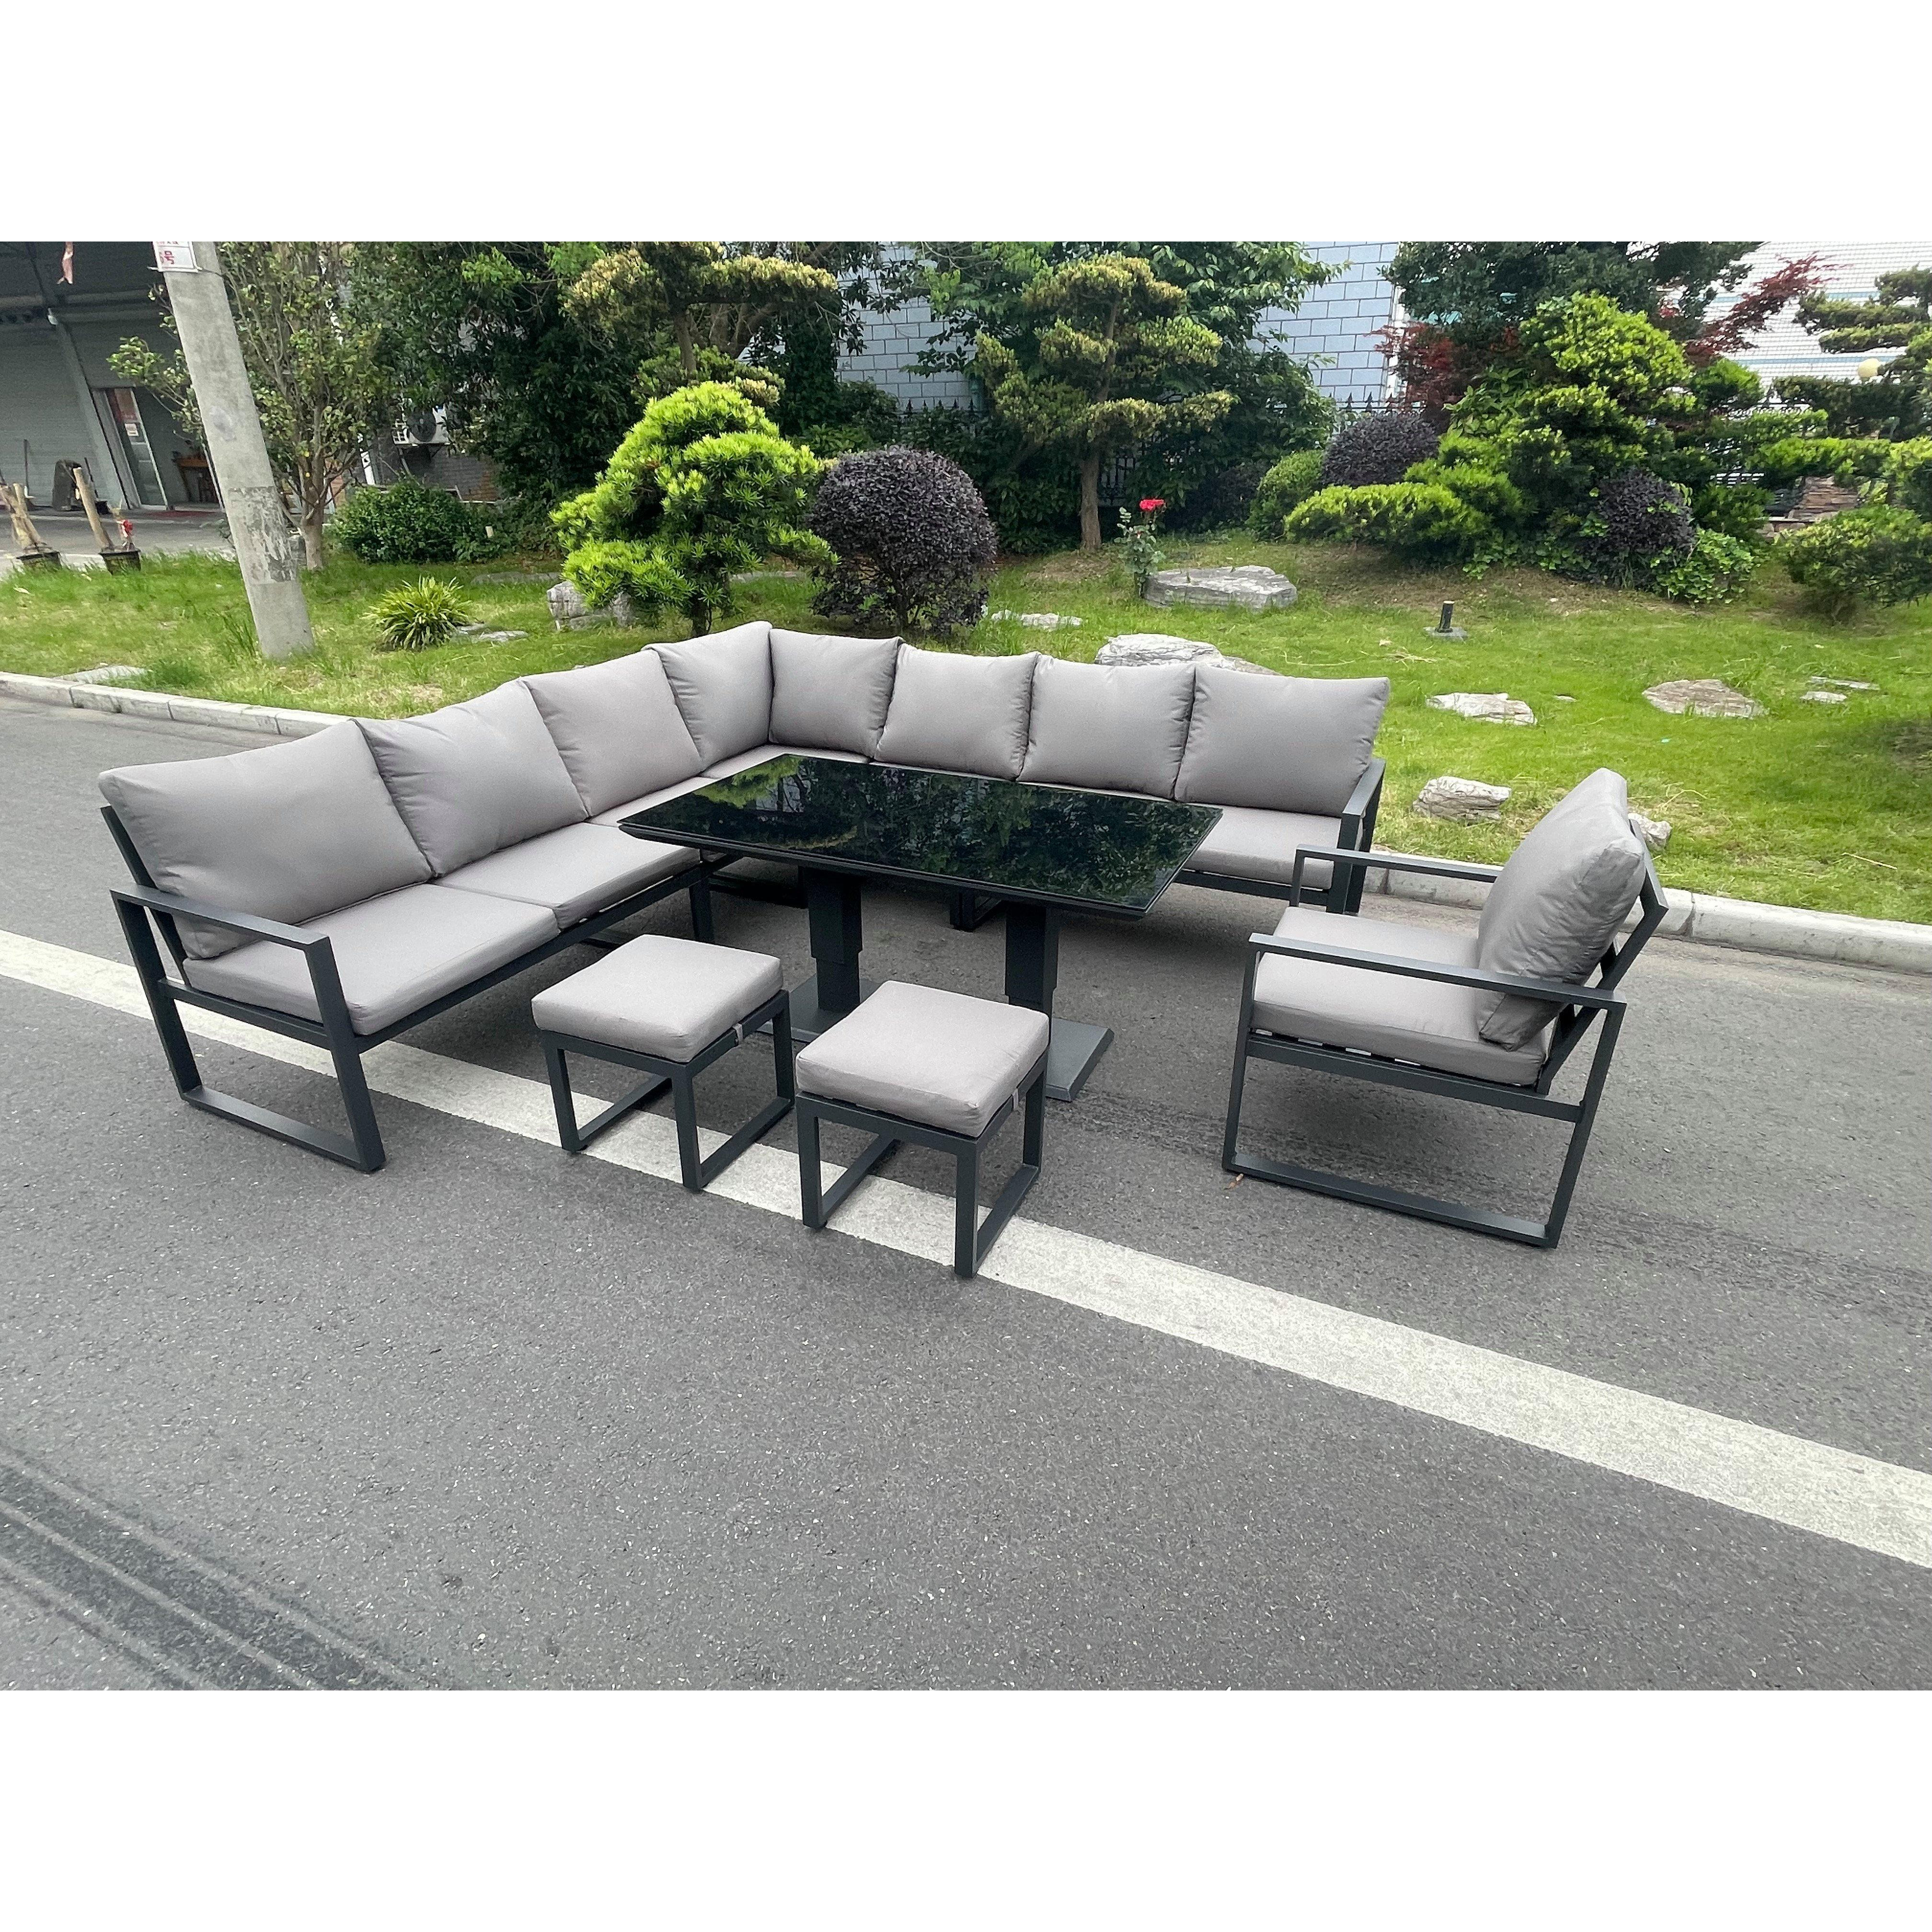 Aluminum Outdoor Garden Furniture Corner Sofa Chair 2 PC Stools Adjustable Rising Lifting Dining Table Sets 10 Seater - image 1